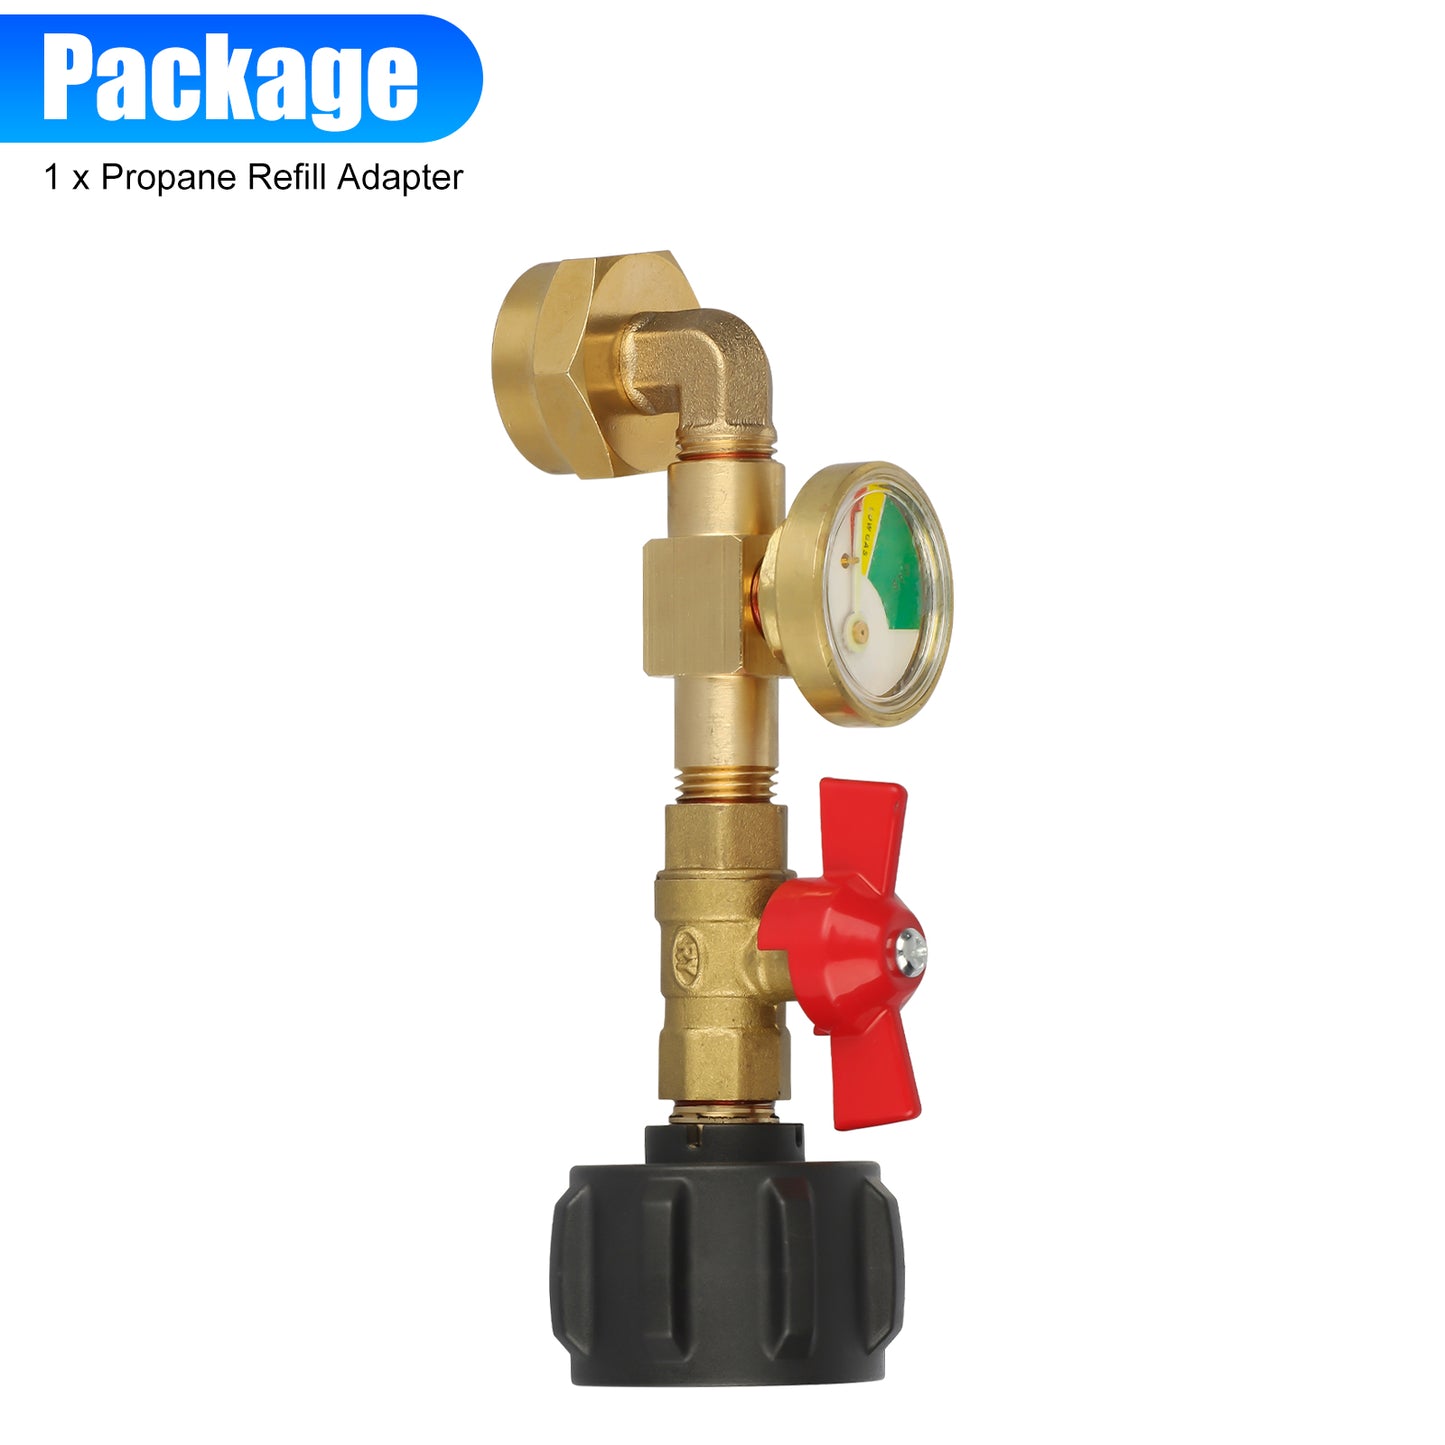 Gas pro Propane Refill Adapter with Valve and Gauge